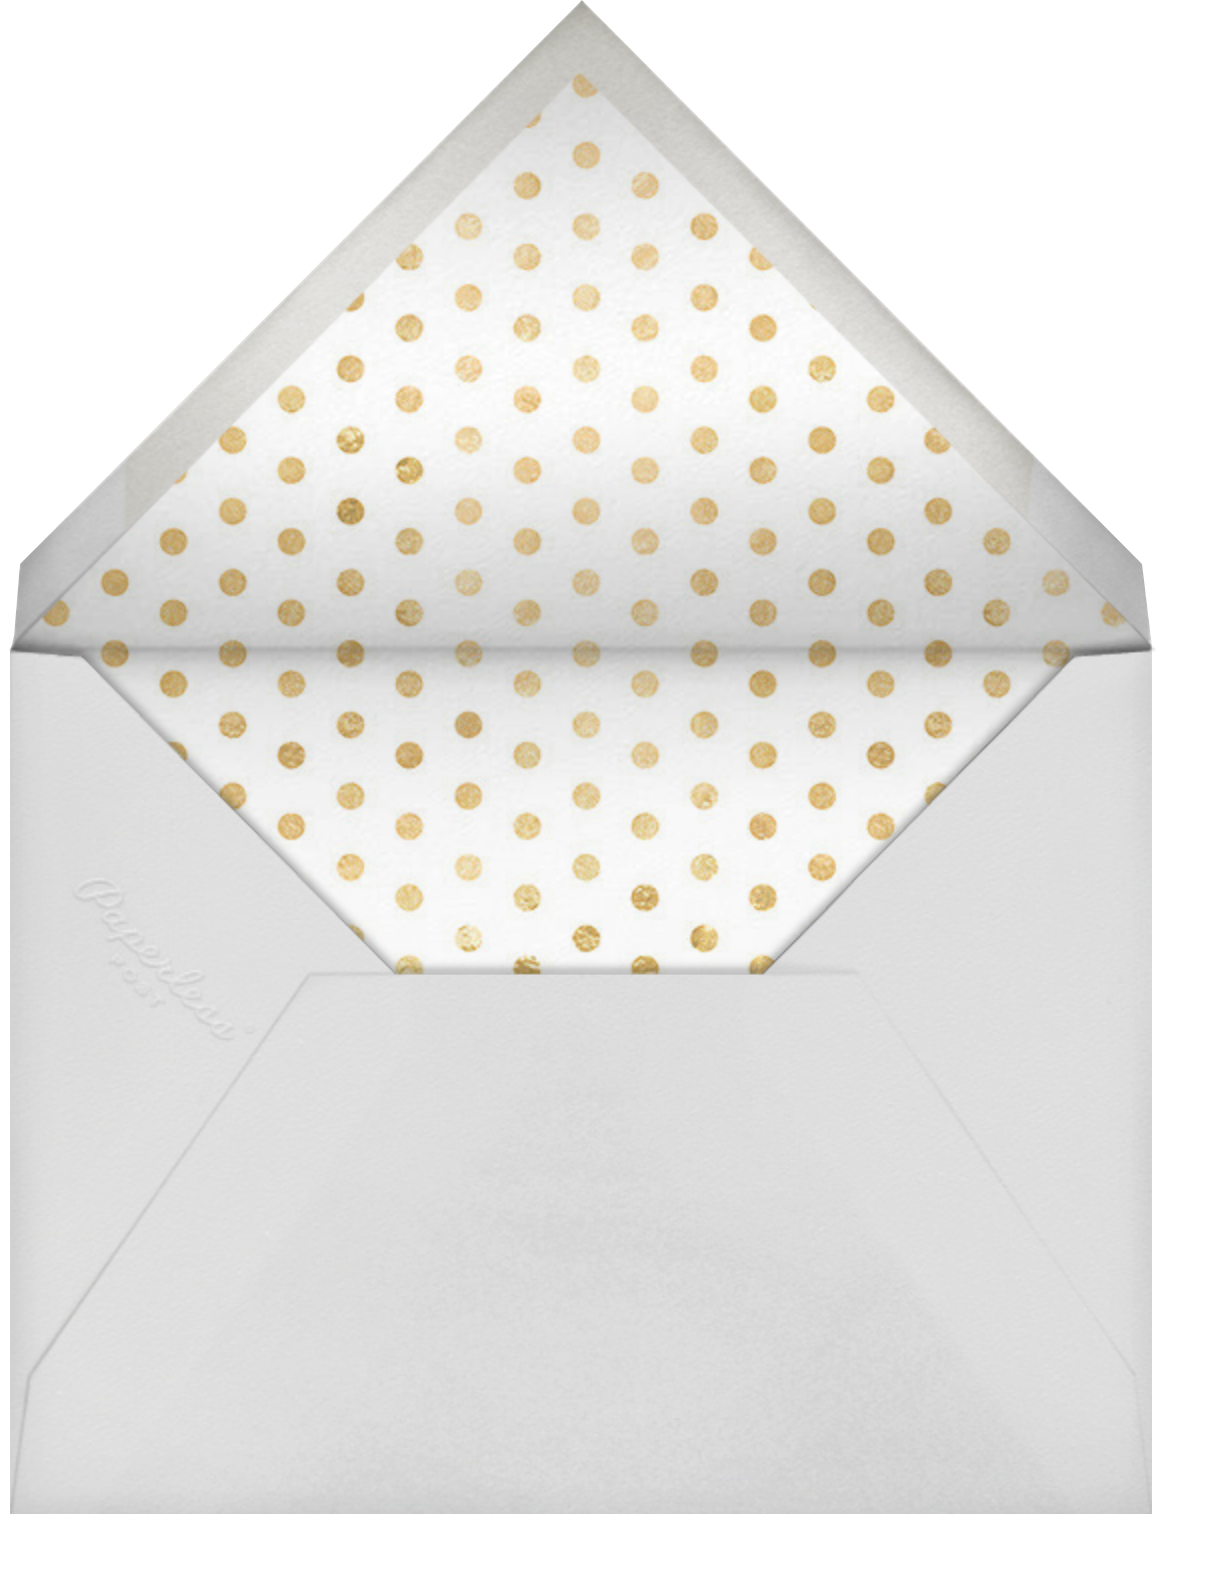 Floral Border Mother's Day - Rifle Paper Co. - Envelope